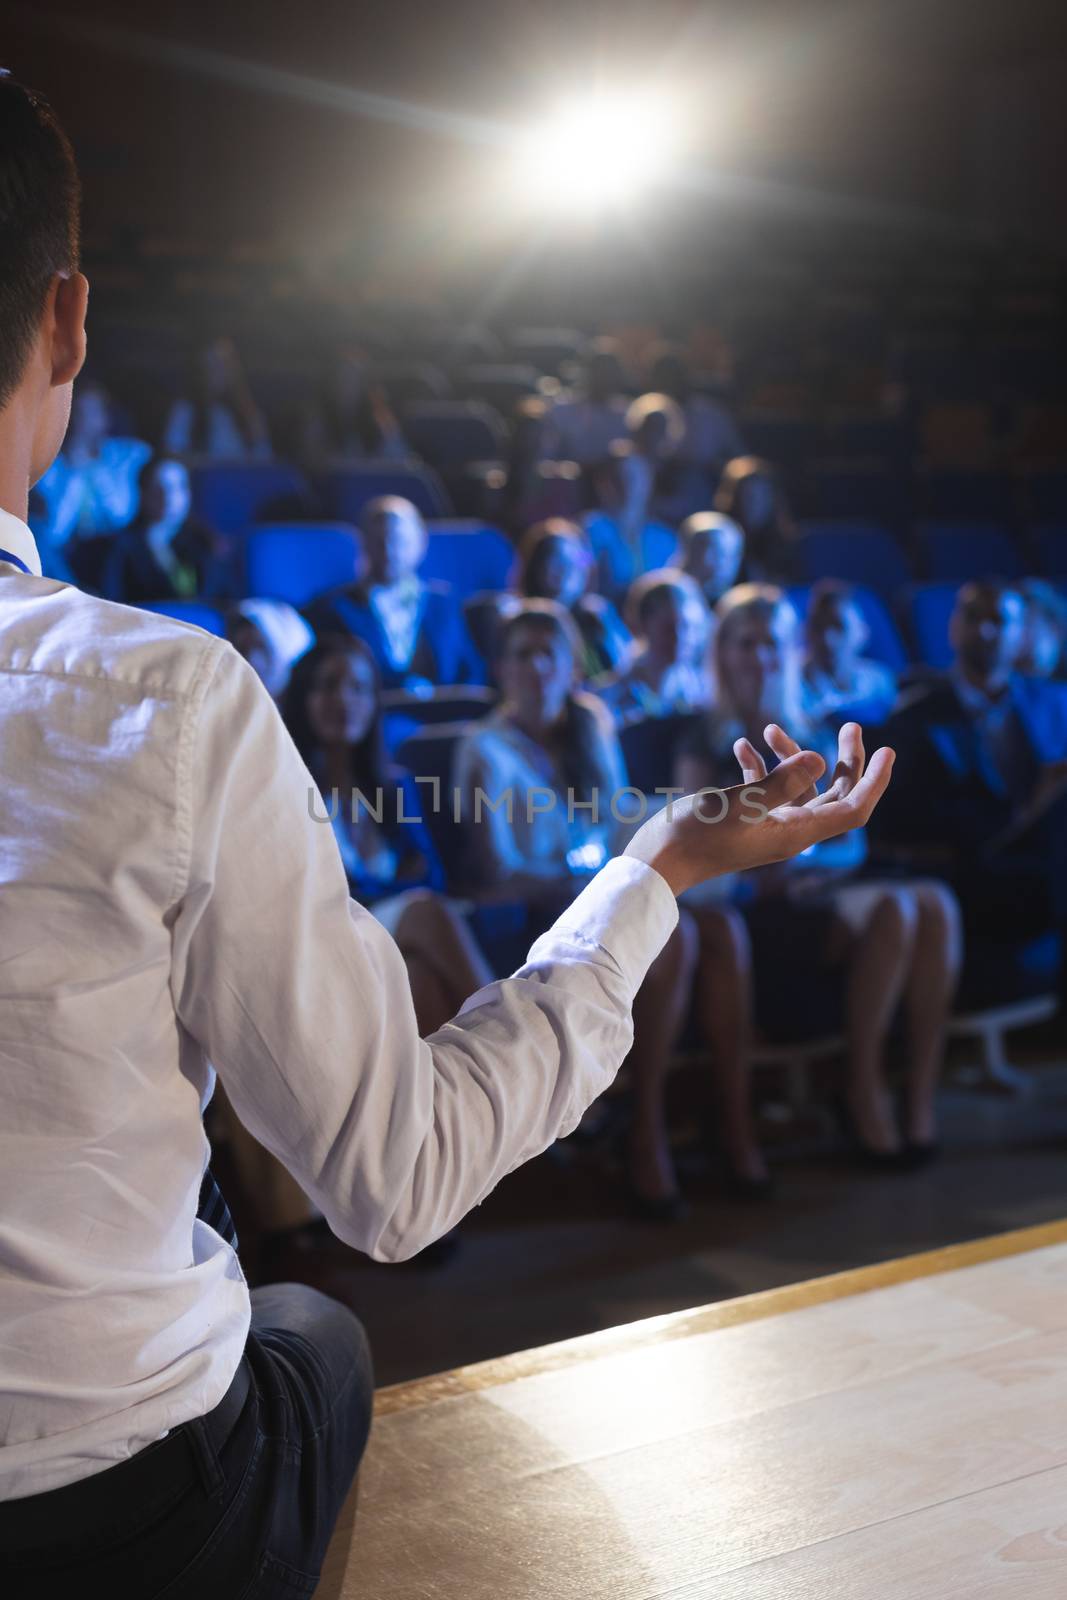 Rear view of Caucasian businessman giving presentation in front of audience in auditorium